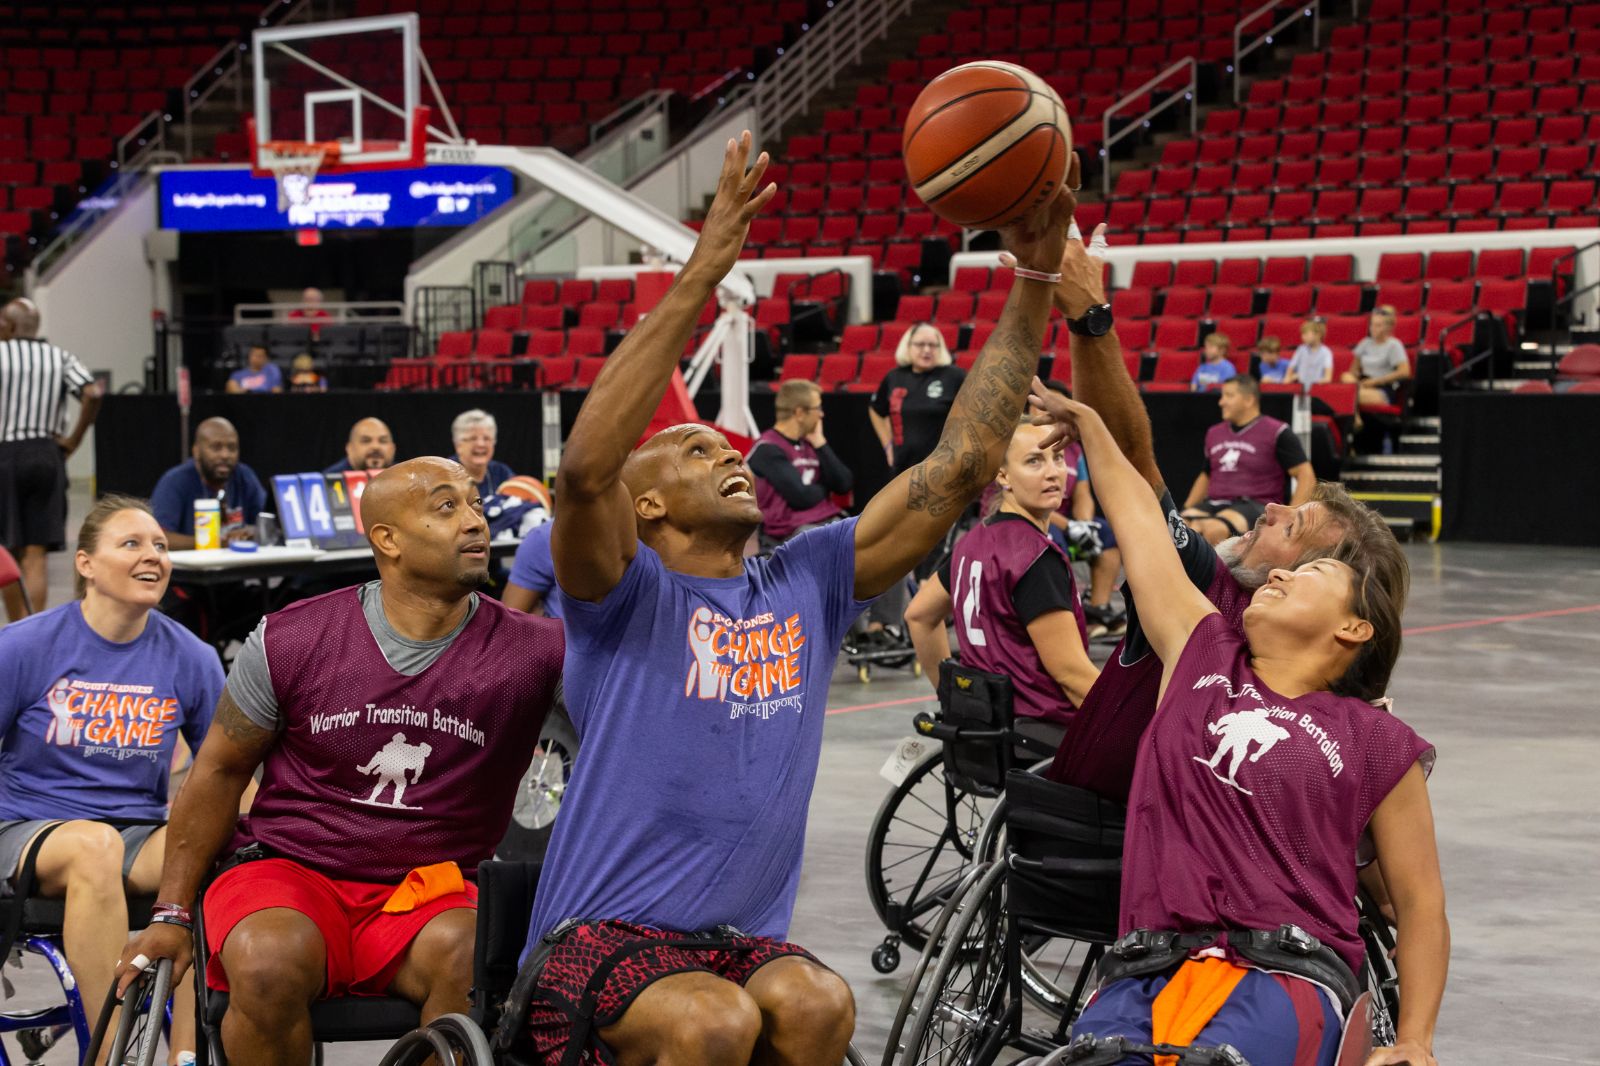 A man in a sports chair goes for a lay up while two opposing players try to block the shot.  The players are diverse in both gender and skin tone.